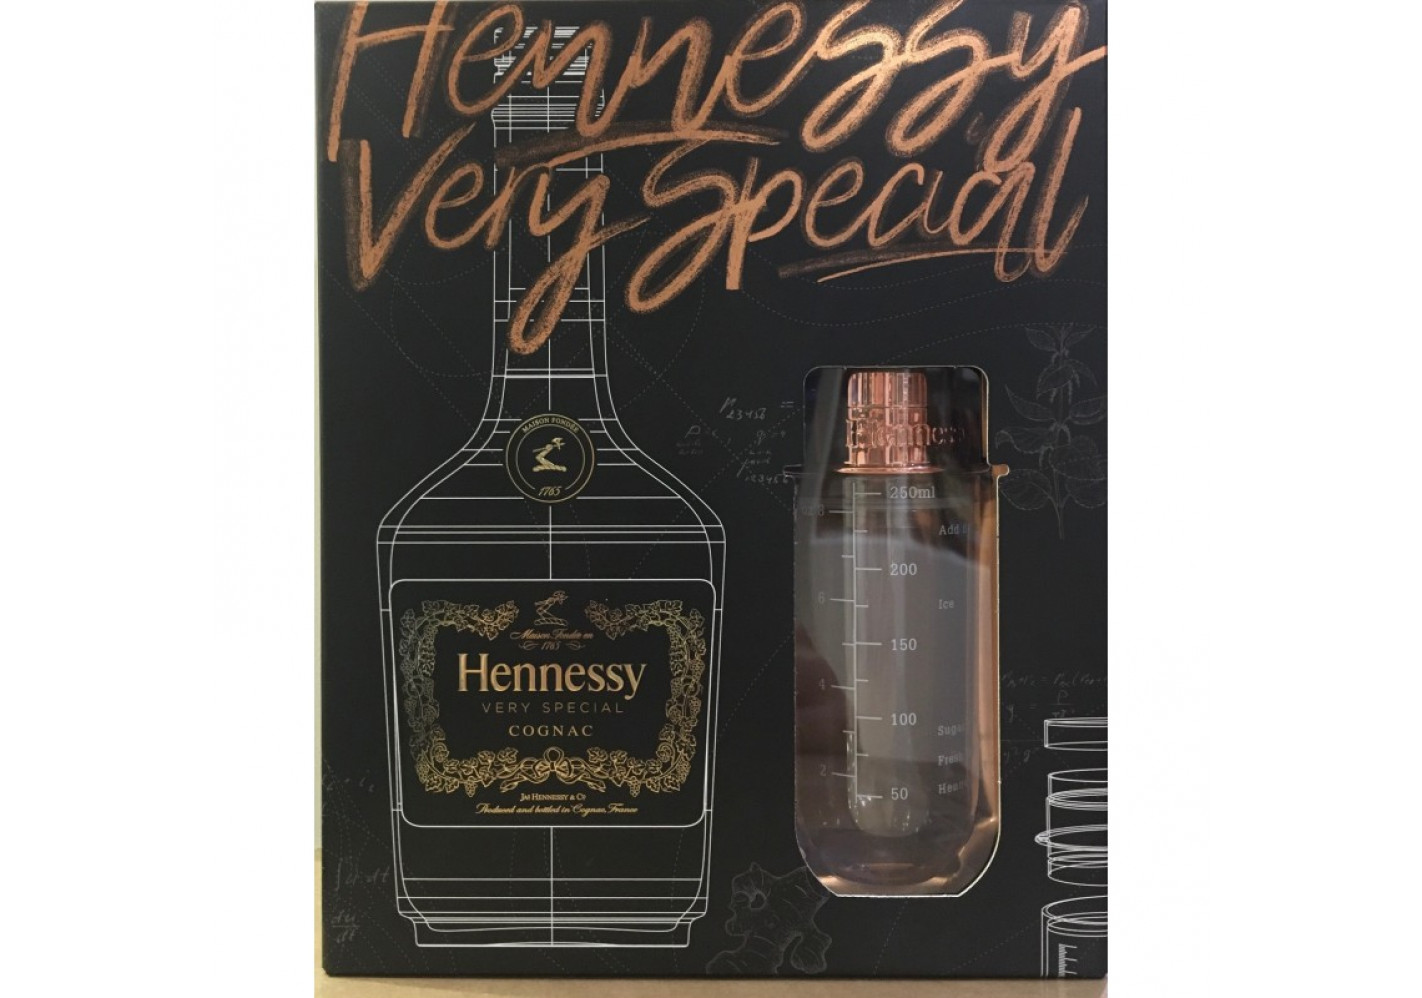 Hennessy - Cognac - Hennessy Very Special (V.S.) - Boxed